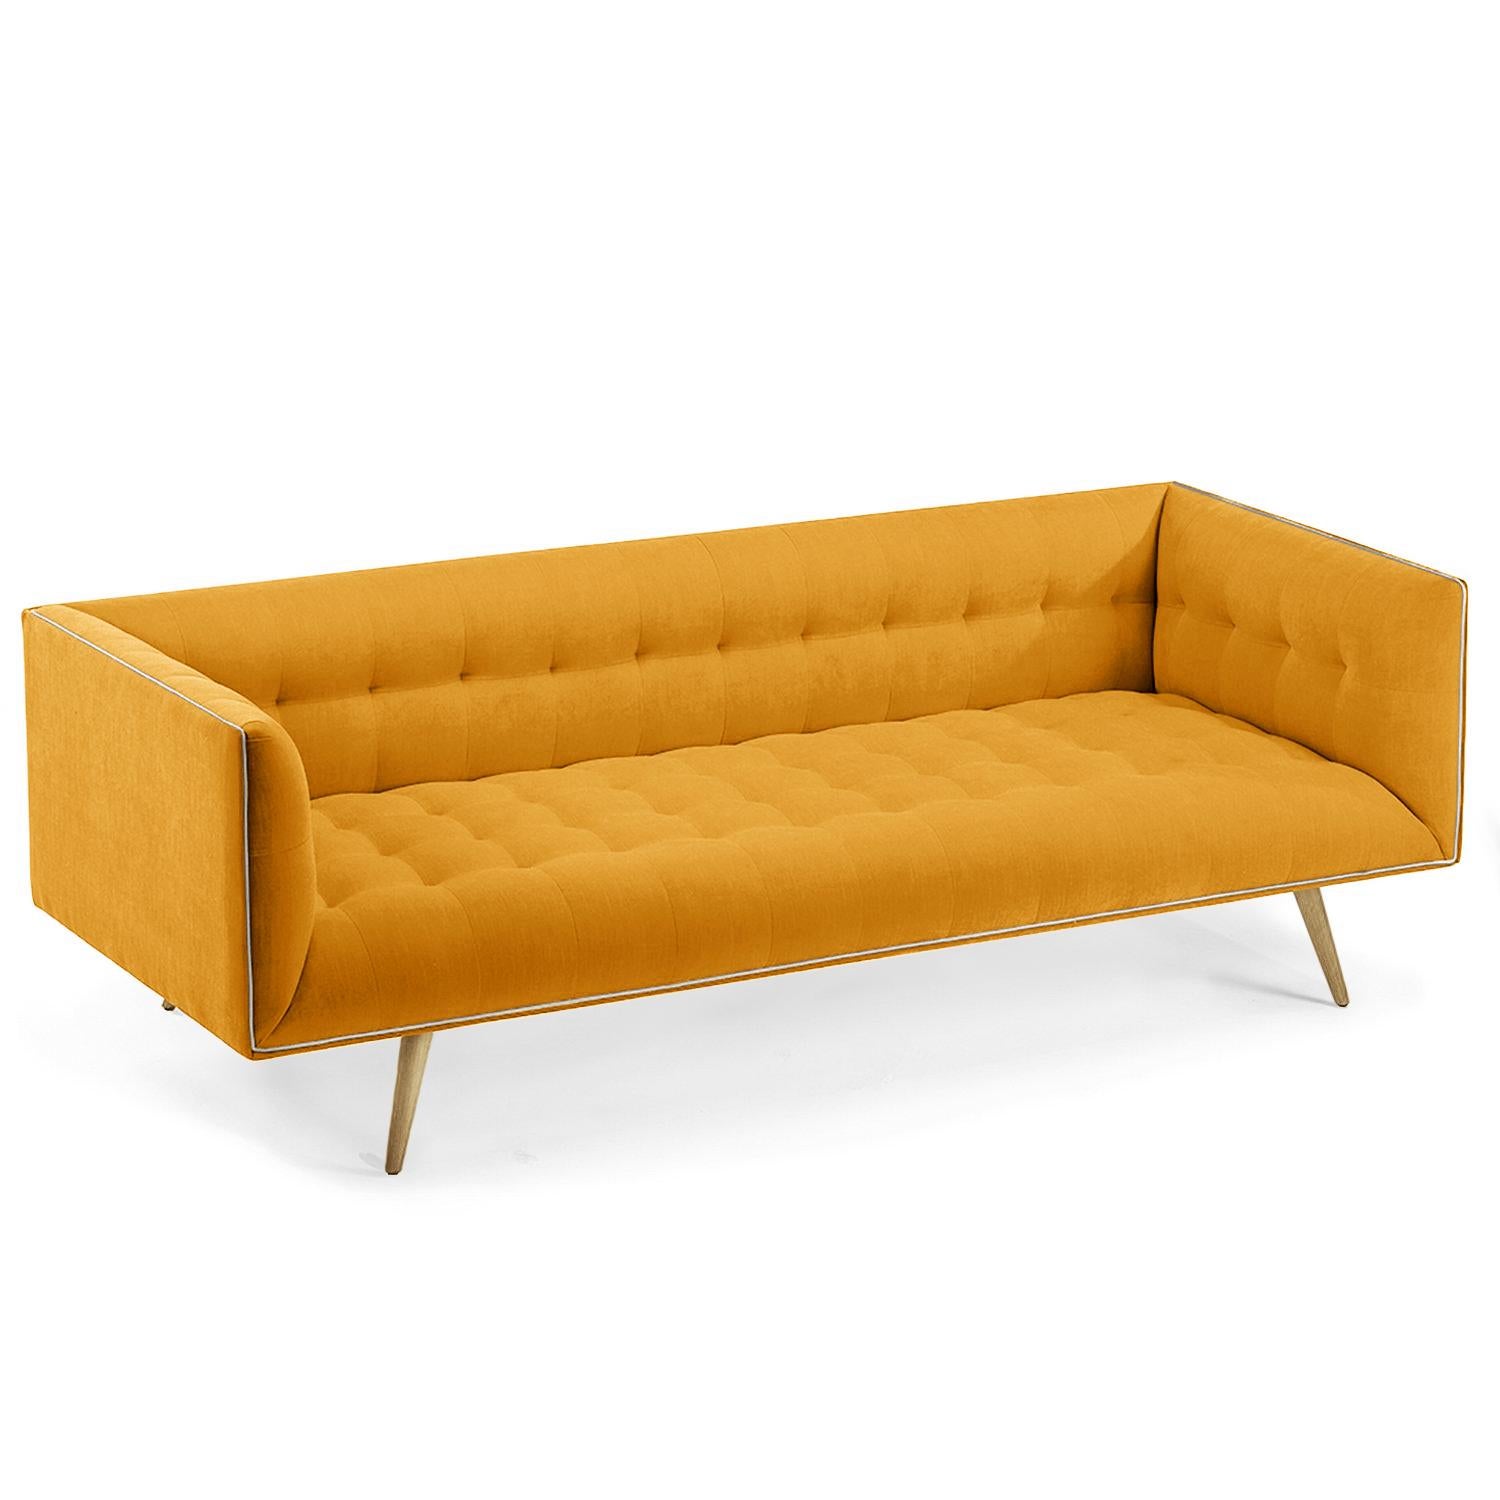 Hand-Crafted Dust Sofa, Large with Natural Light Oak For Sale